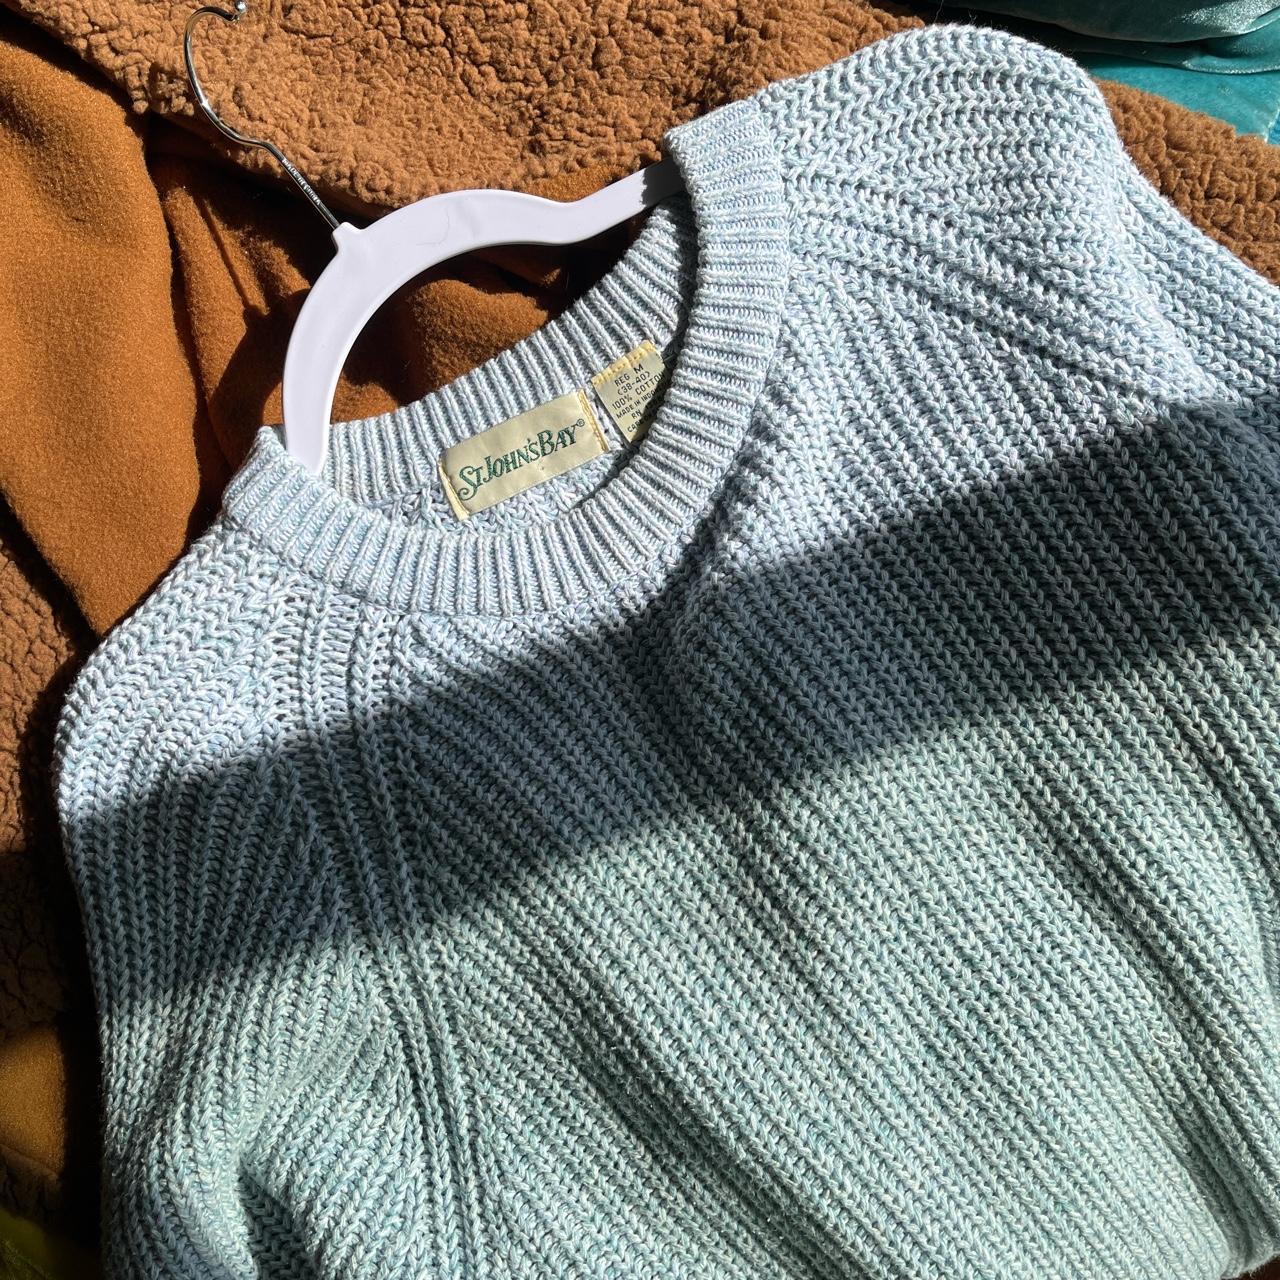 🌾 Vintage sweater from St John’s Bay. Circa 1990s is... - Depop